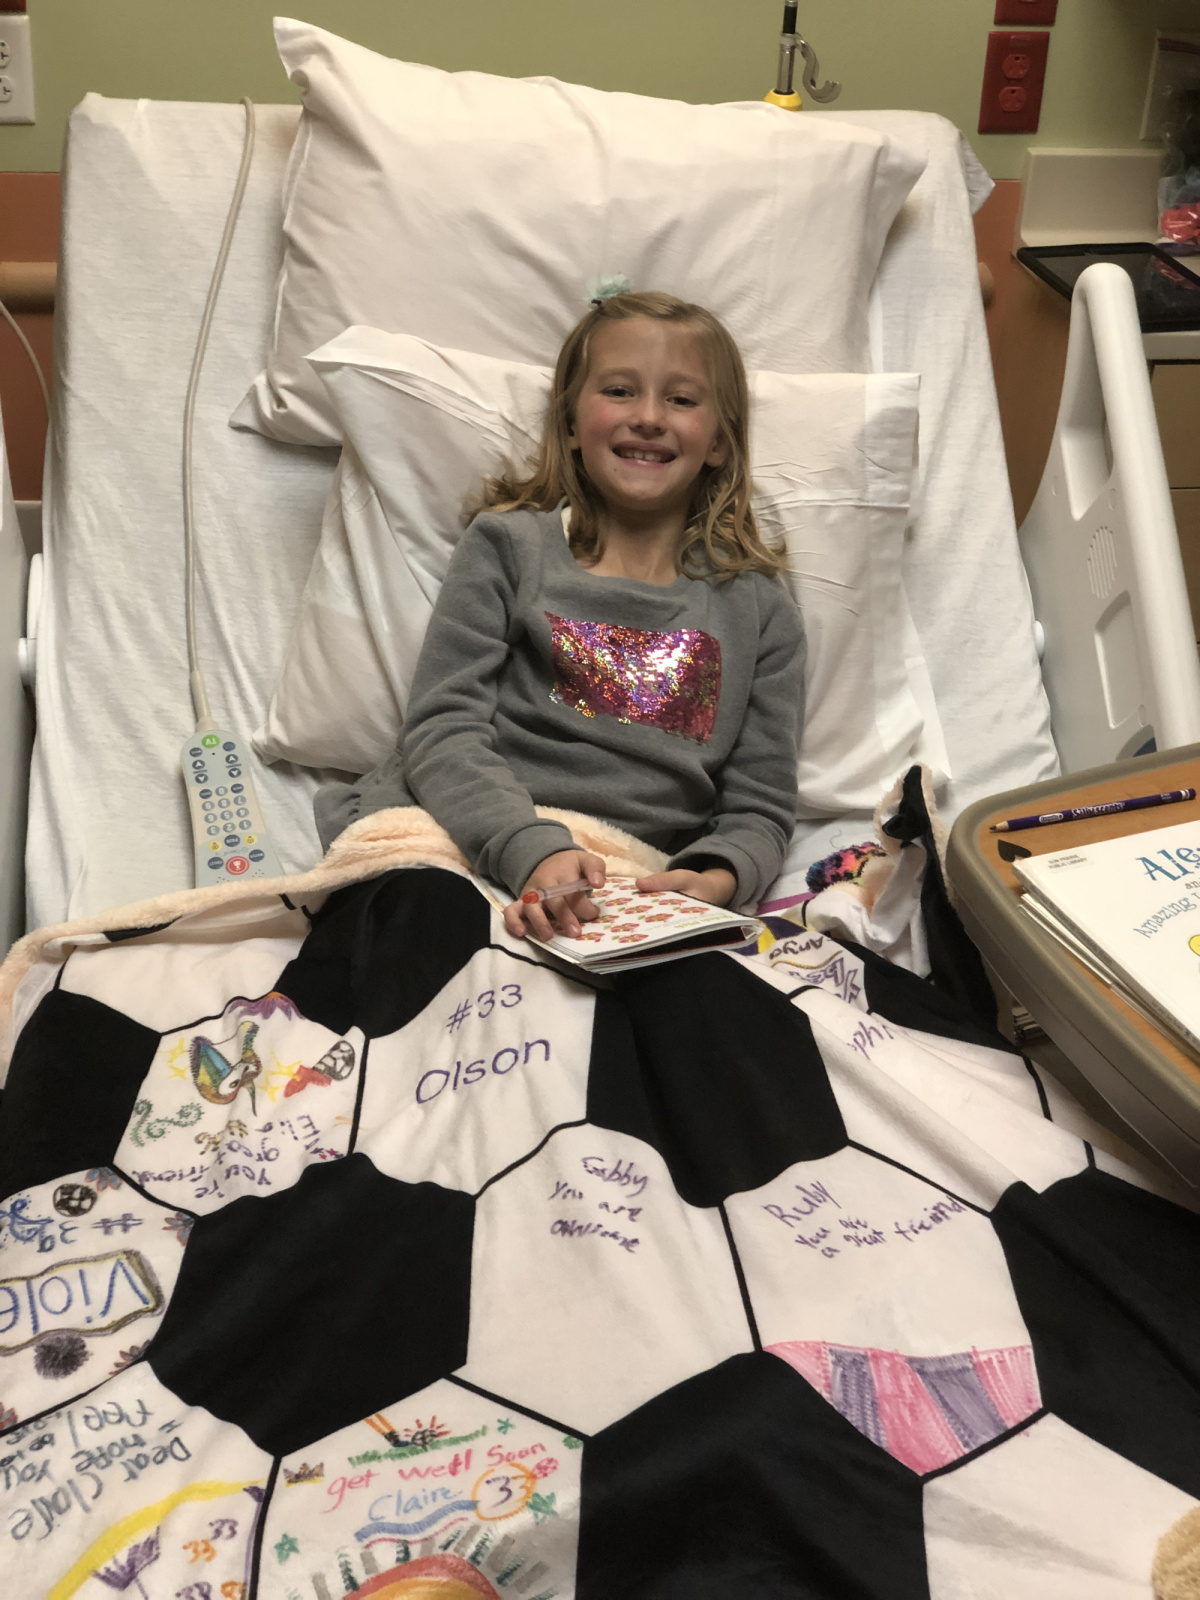 She's so brave with the help of her signed blanket from her soccer team! 